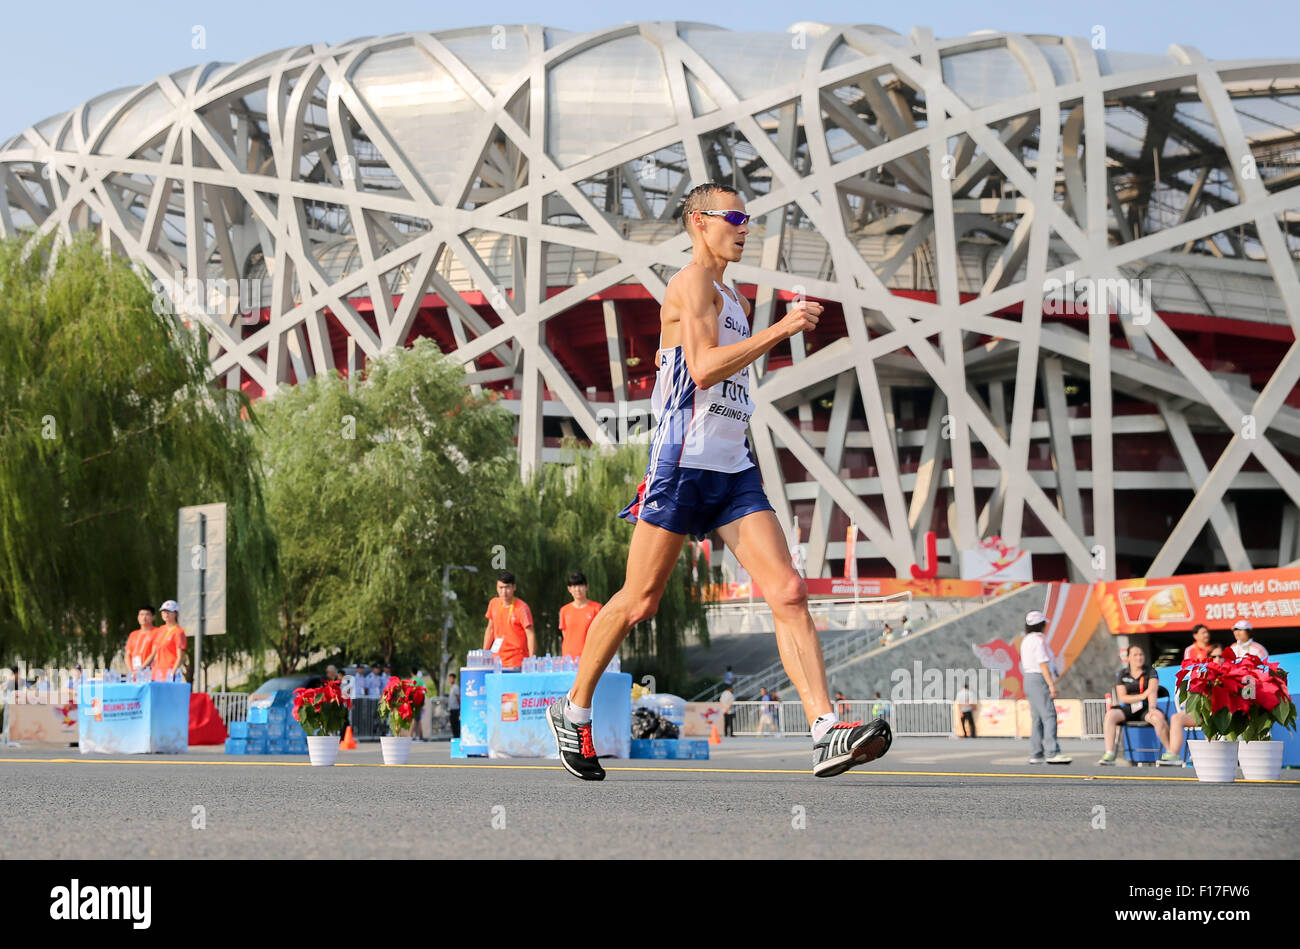 Beijing, China. 29th Aug, 2015. Matej Toth of Slovakia competes in the men's 50km Walk race during the Beijing 2015 IAAF World Championships at the National Stadium, also known as Bird's Nest, in Beijing, China, 29 August 2015. Photo: Michael Kappeler/dpa/Alamy Live News Stock Photo